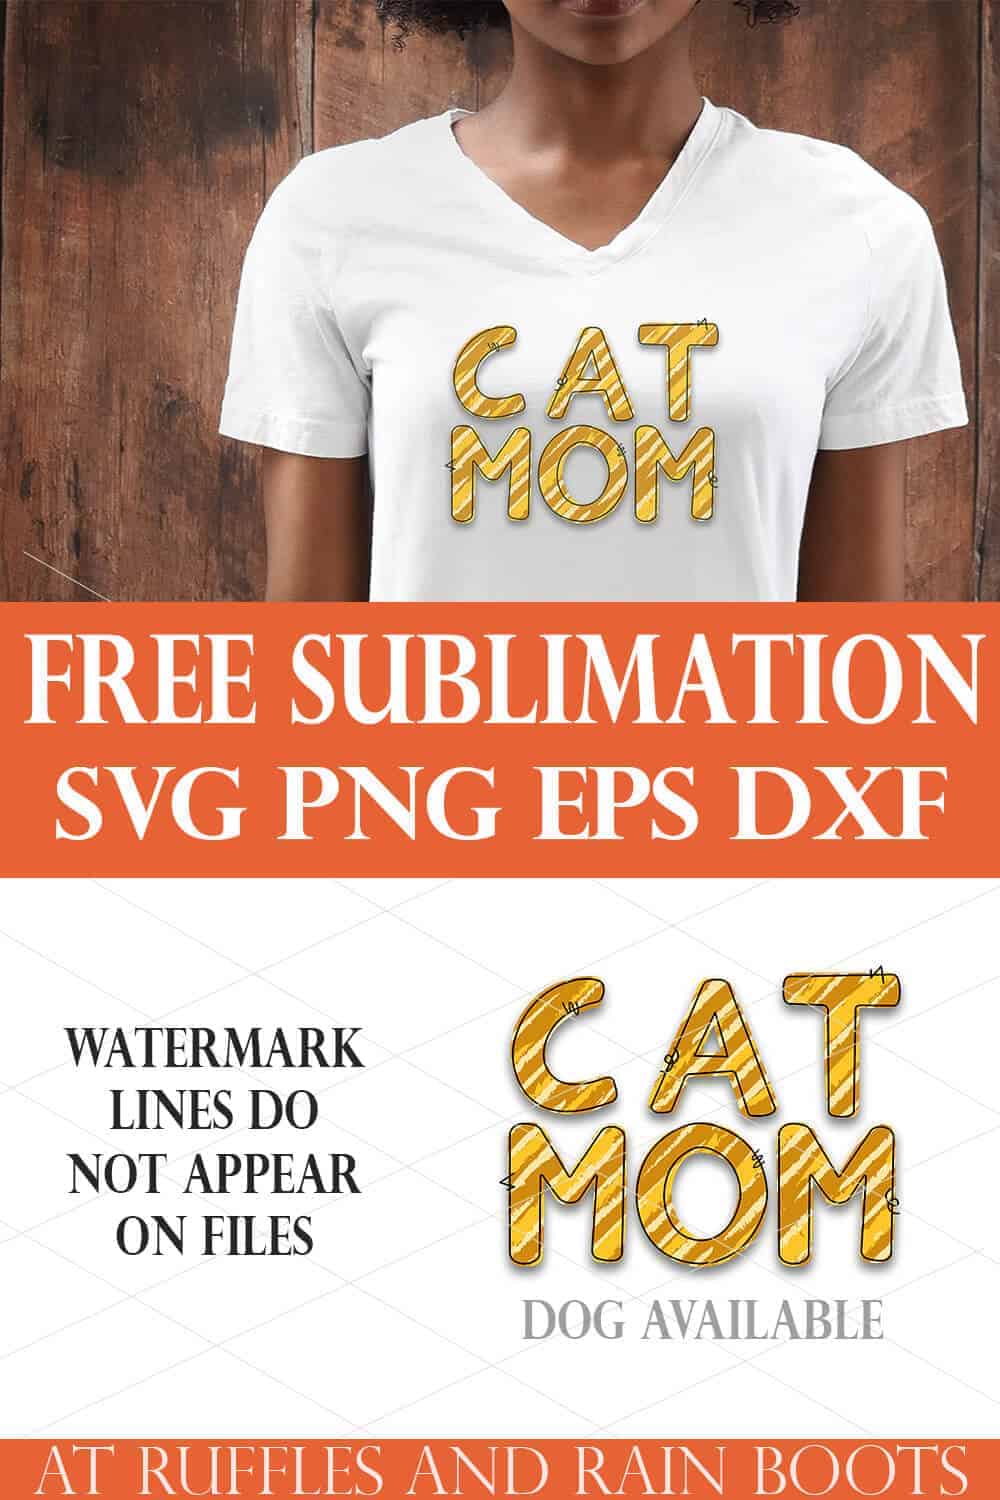 vertical image of cat mom sublimation animal print on Black woman in white shirt